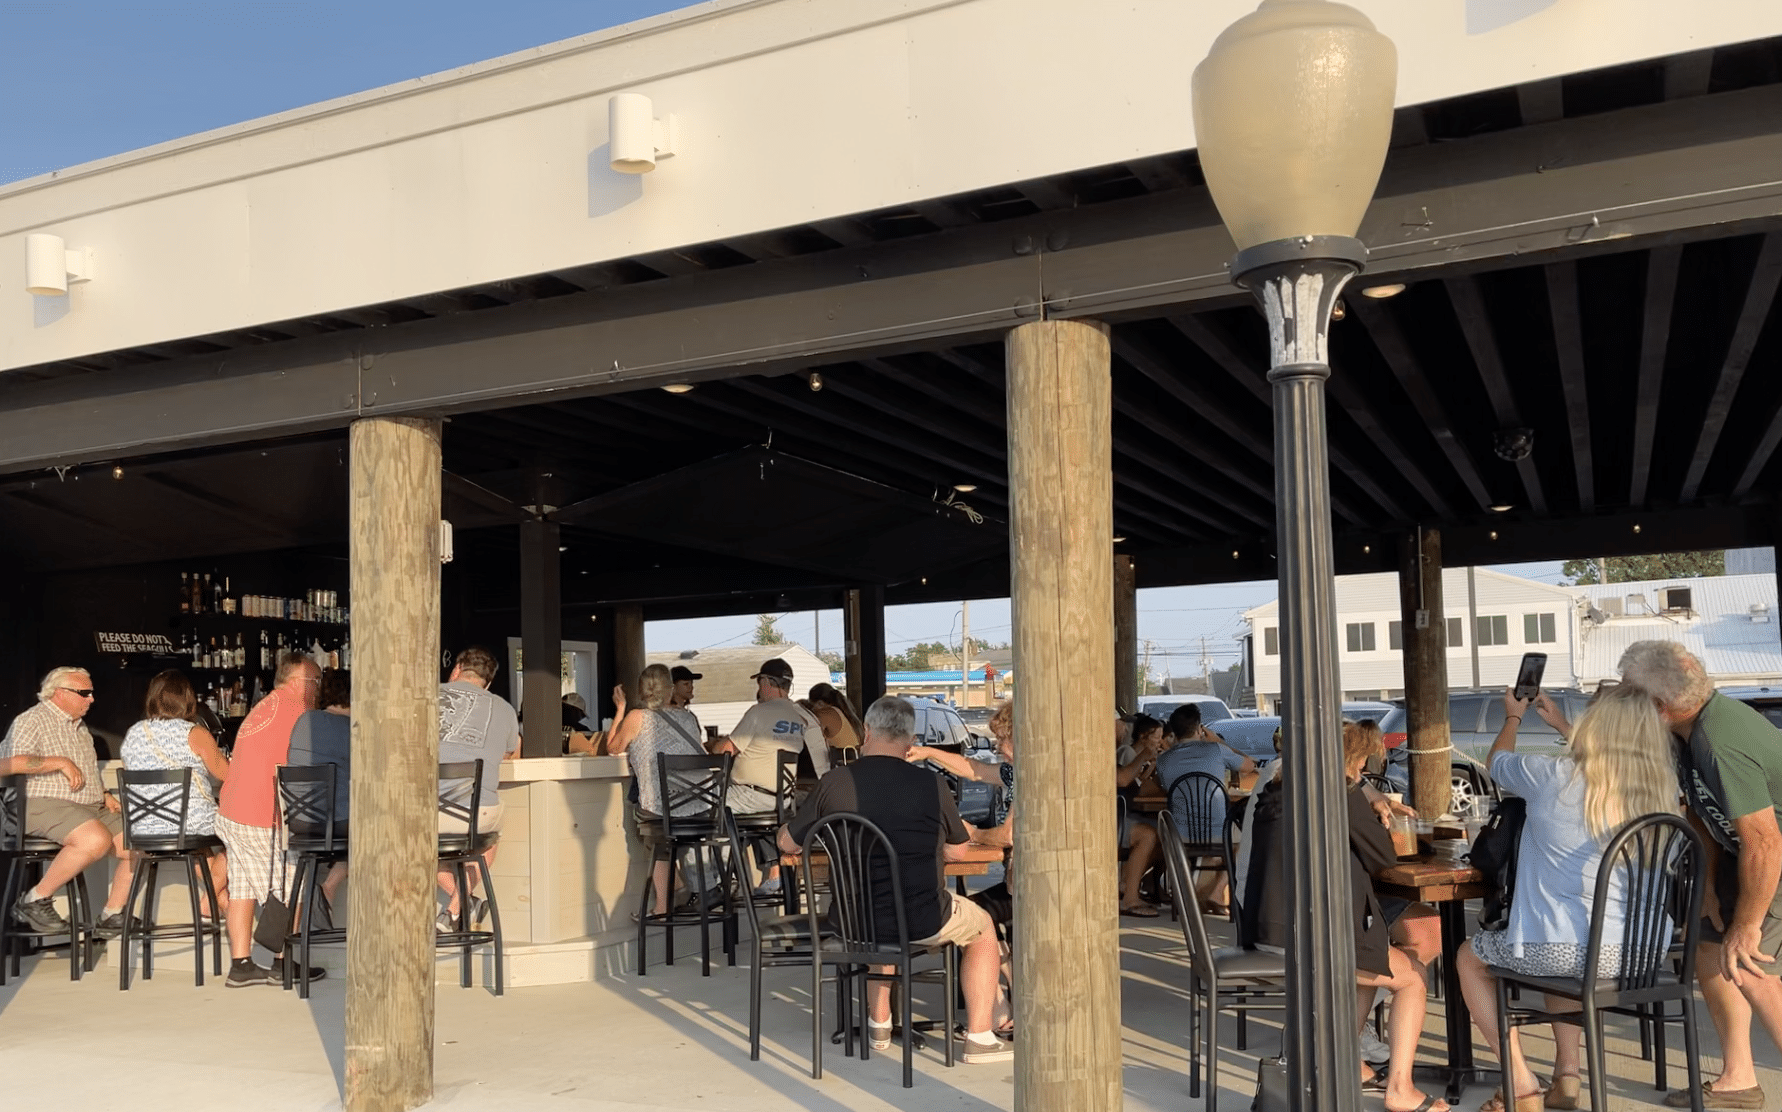 Don's Seafood outdoor dining area. Chincoteague, Virginia. Photo by ConsumerMojo.com